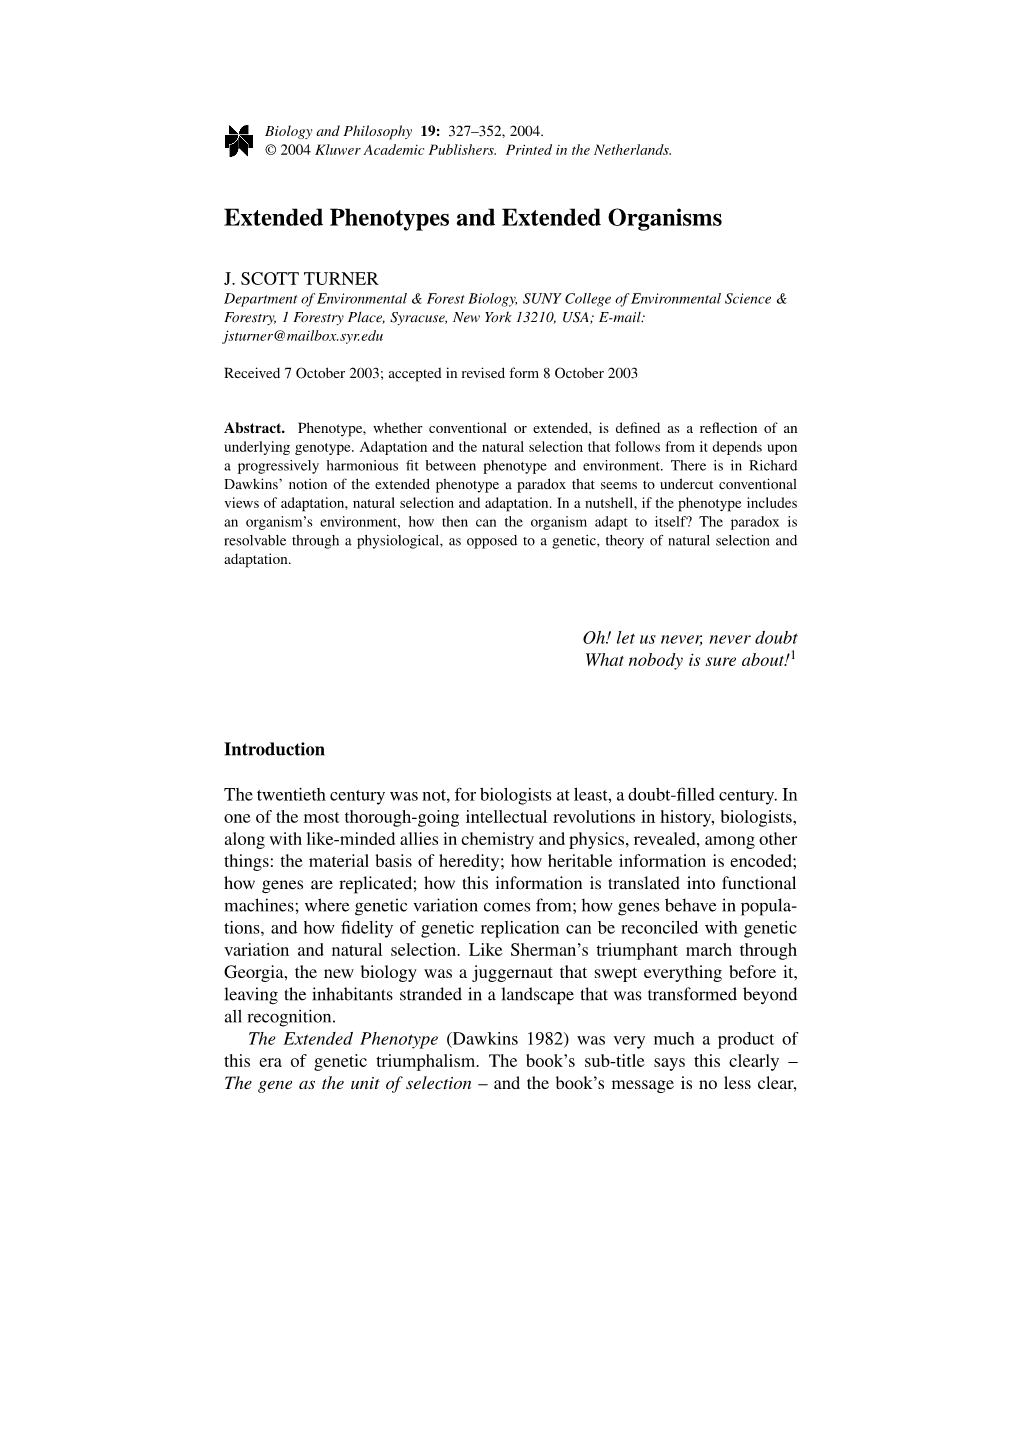 Extended Phenotypes and Extended Organisms